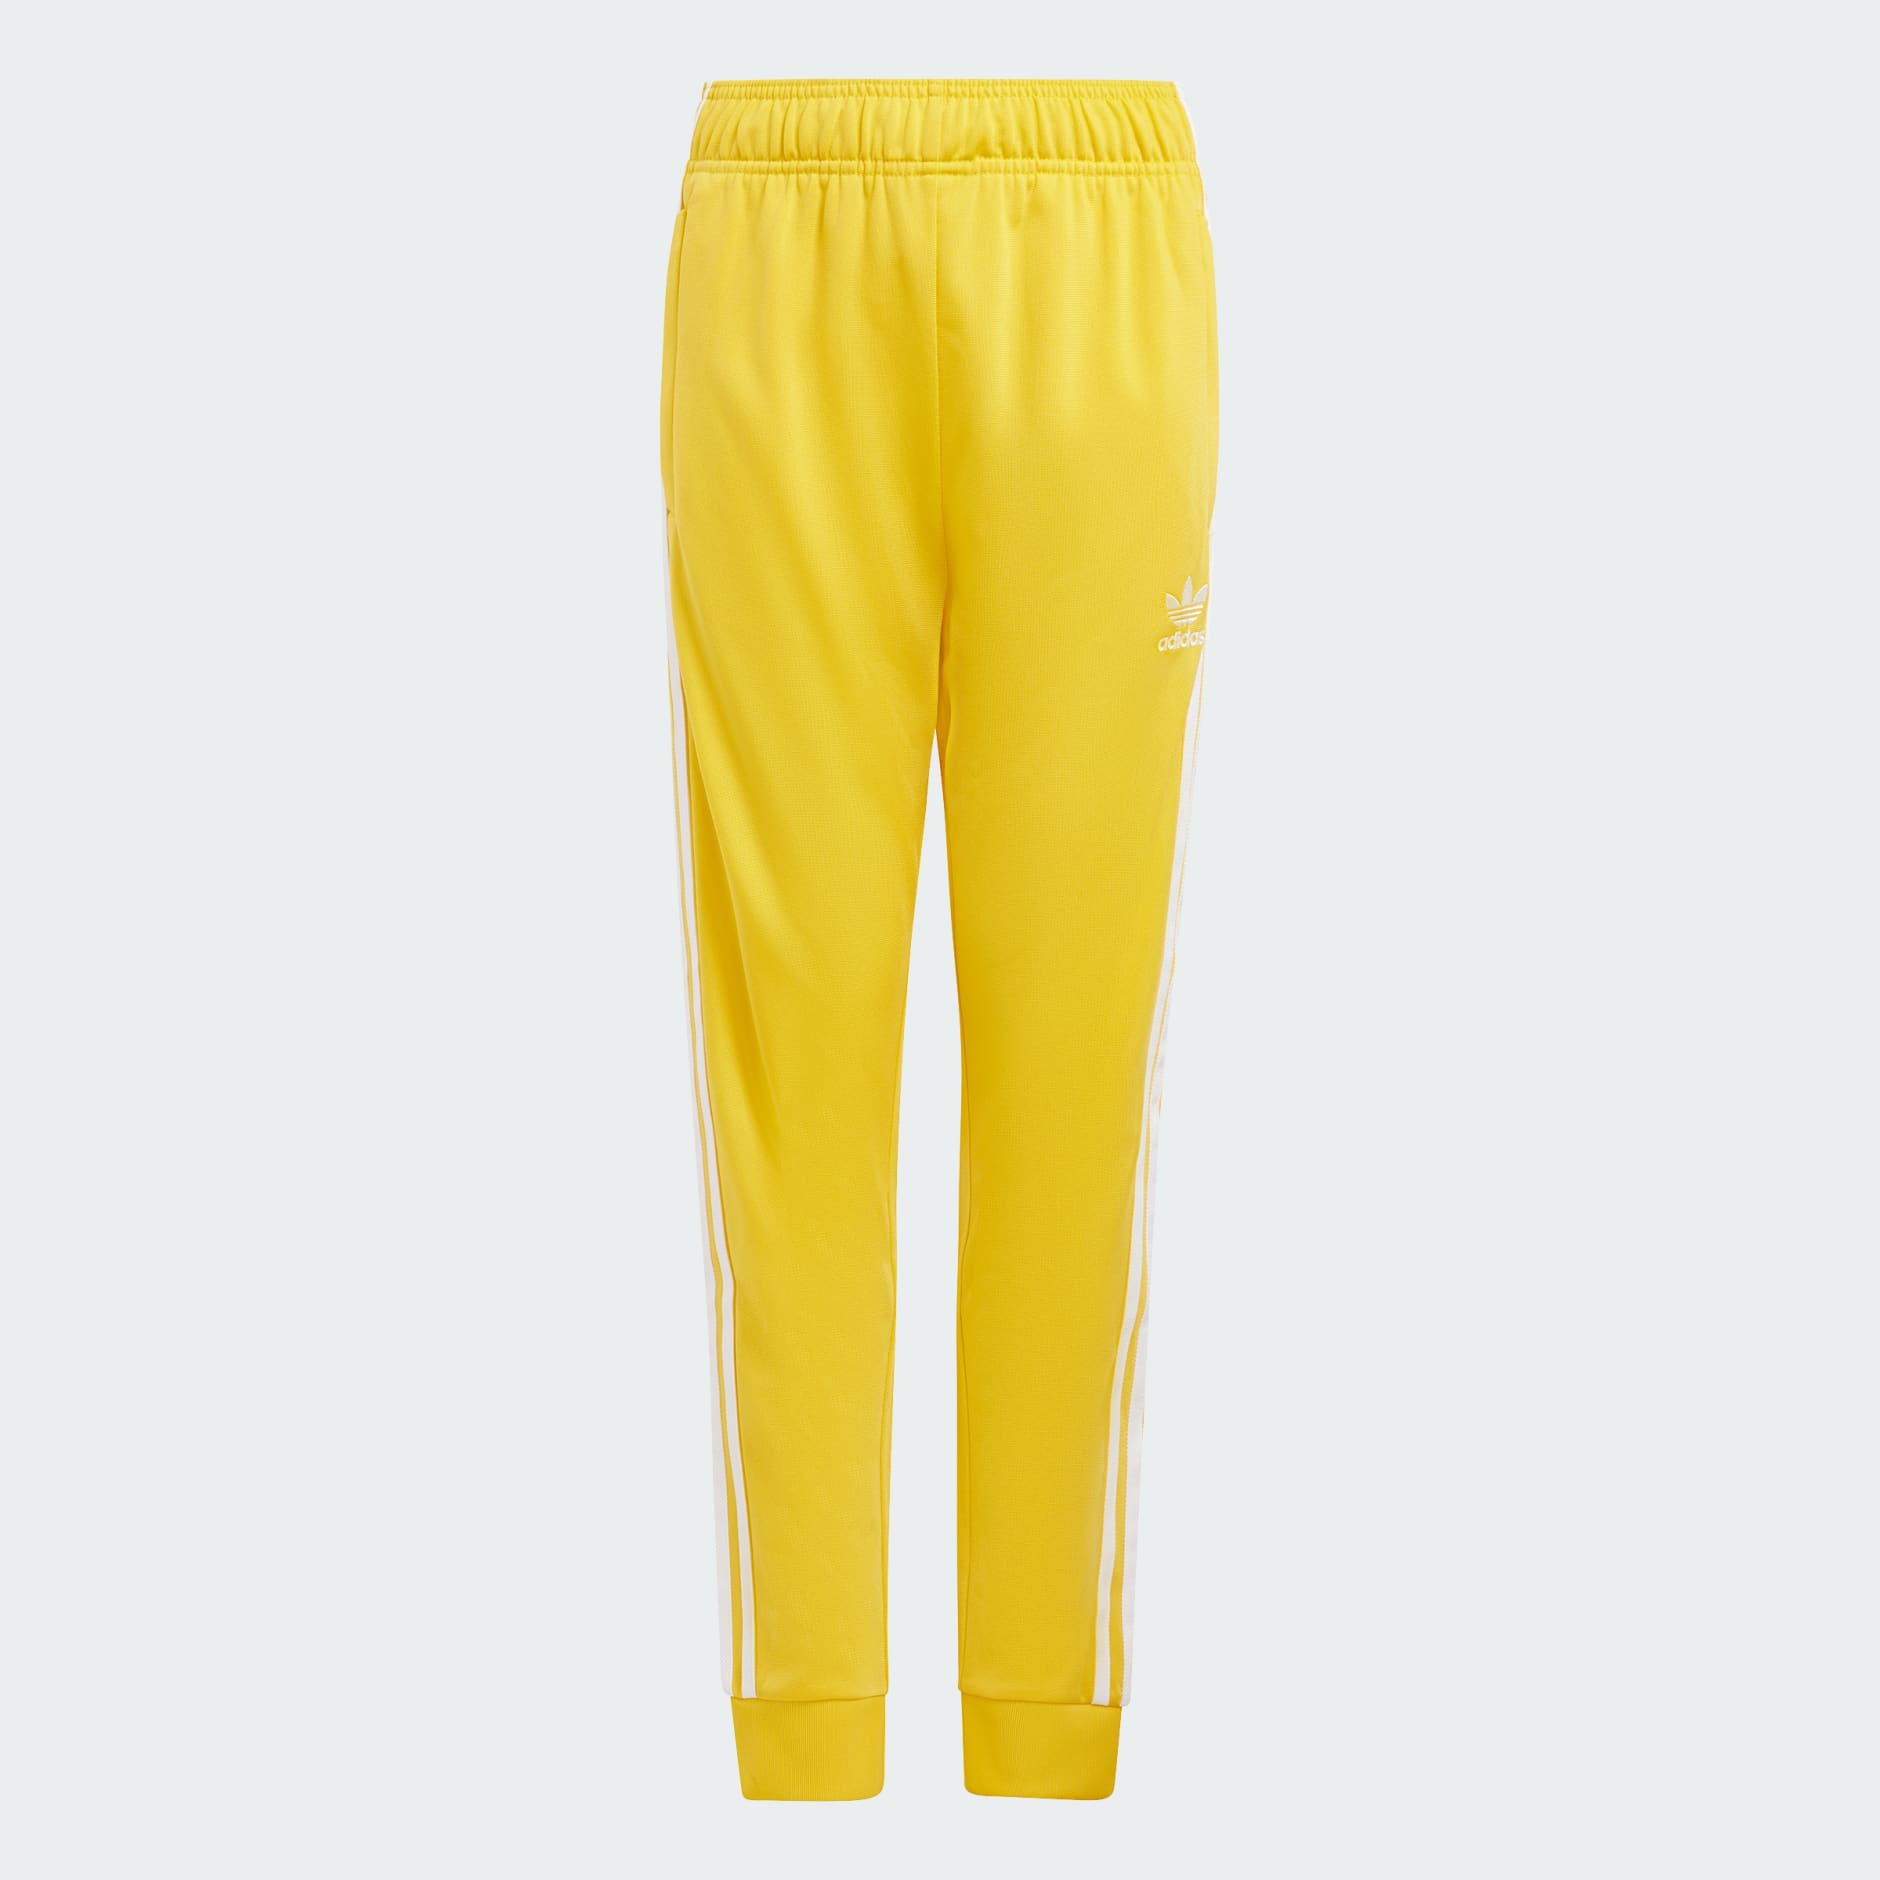 Plain Ladies Yellow Track Pant, Waist Size: 30.0 at Rs 120/piece in Surat